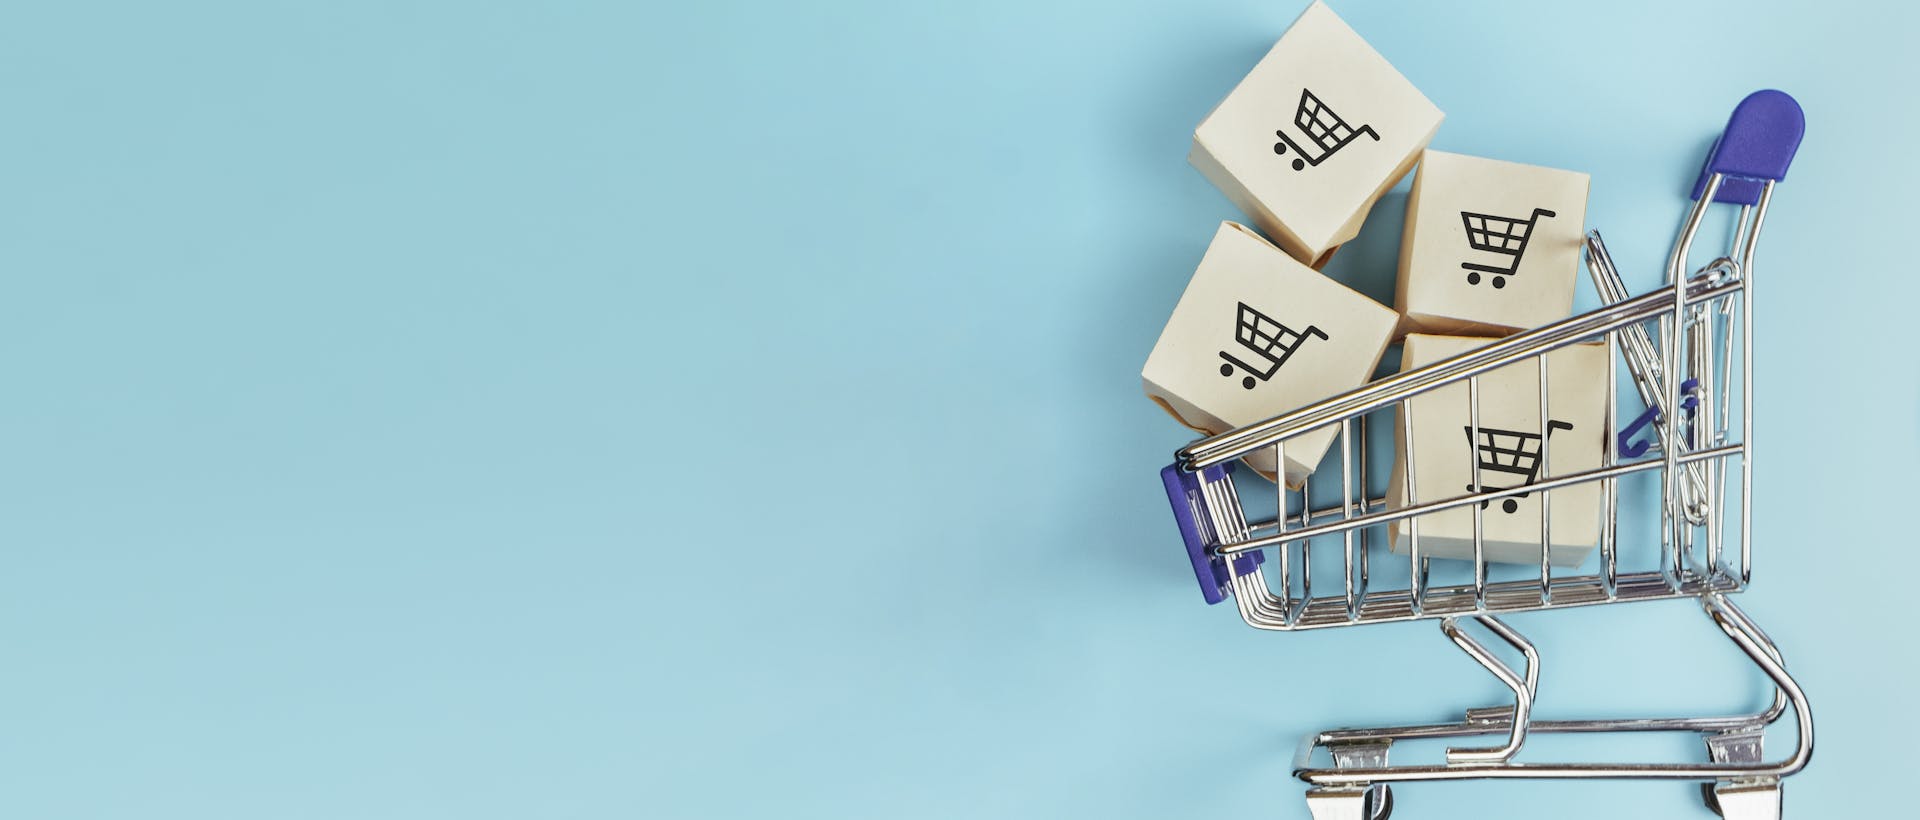 Image of a shopping cart to represent online shopping